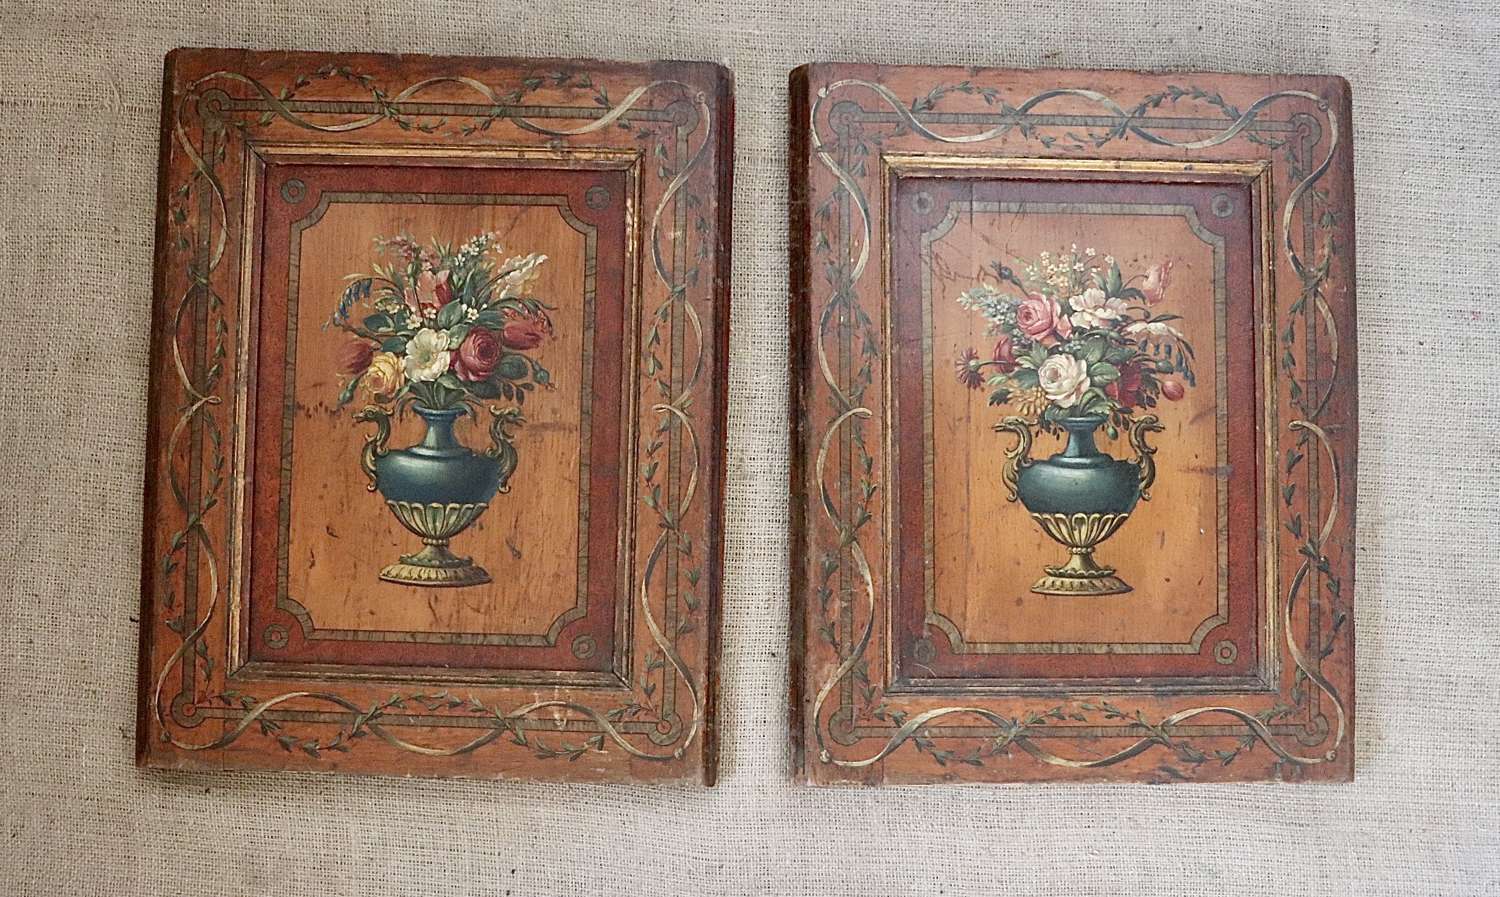 Pair of florally painted wooden panels